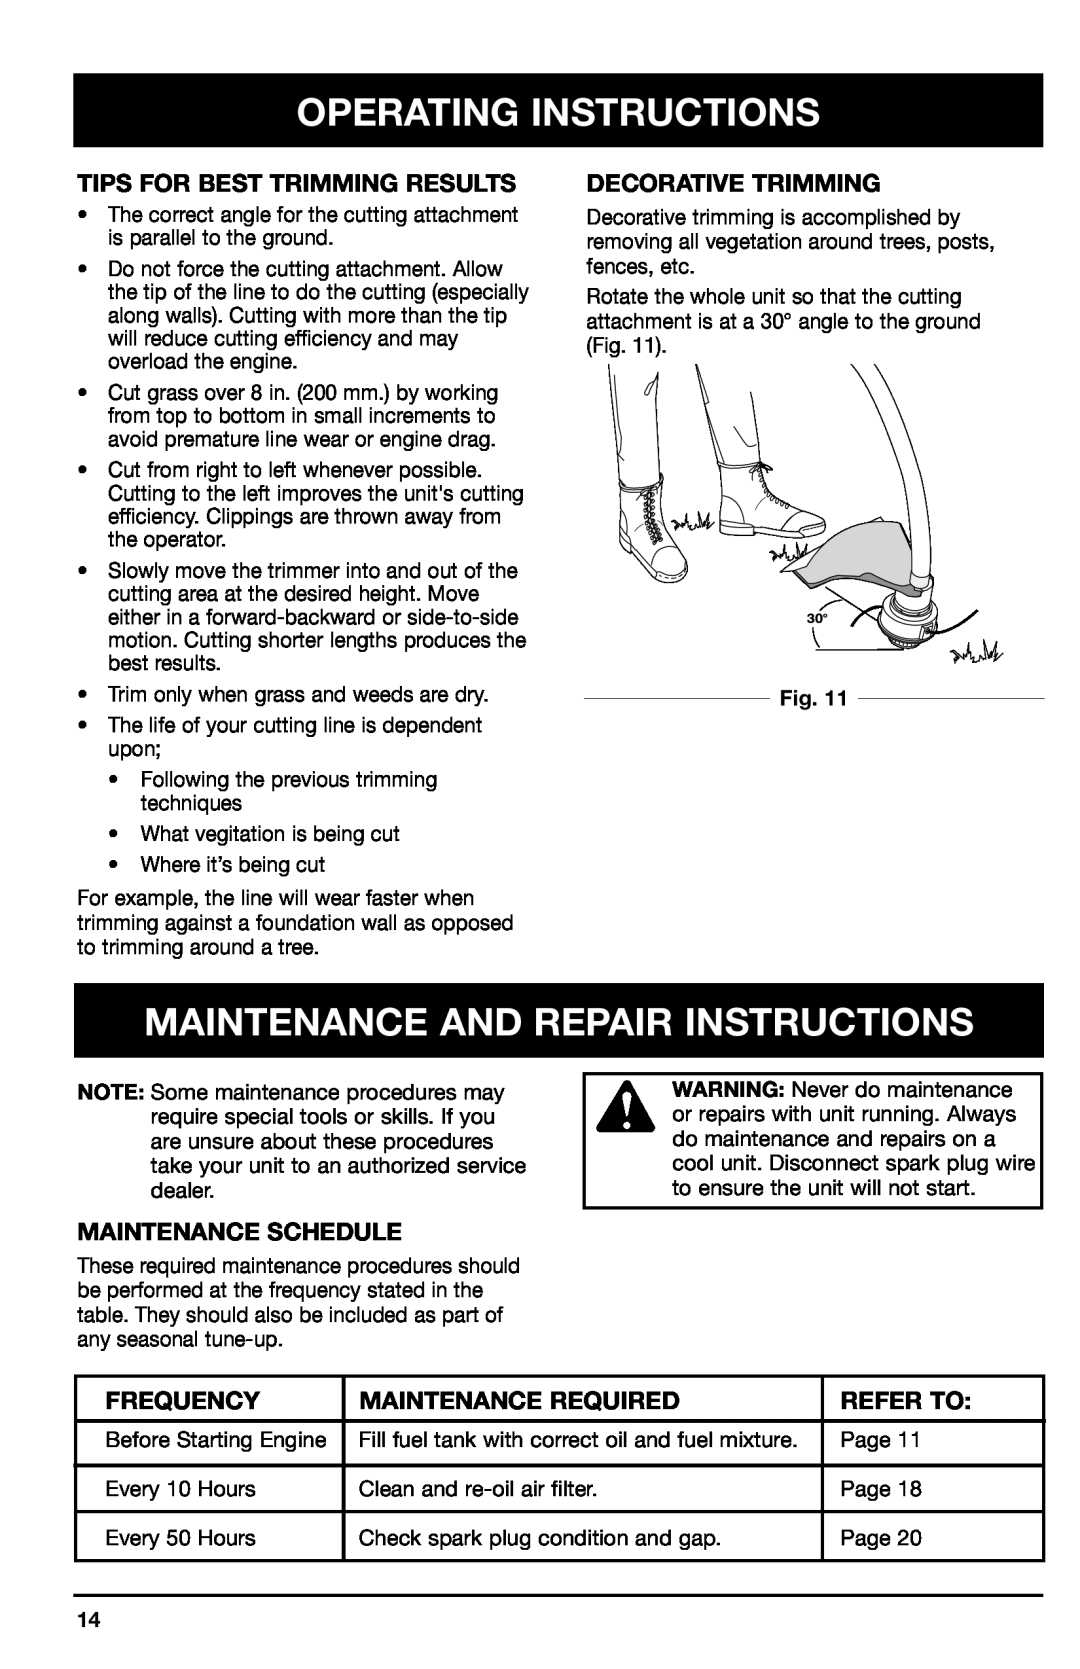 Ryobi 700r Maintenance And Repair Instructions, Tips For Best Trimming Results, Decorative Trimming, Maintenance Schedule 